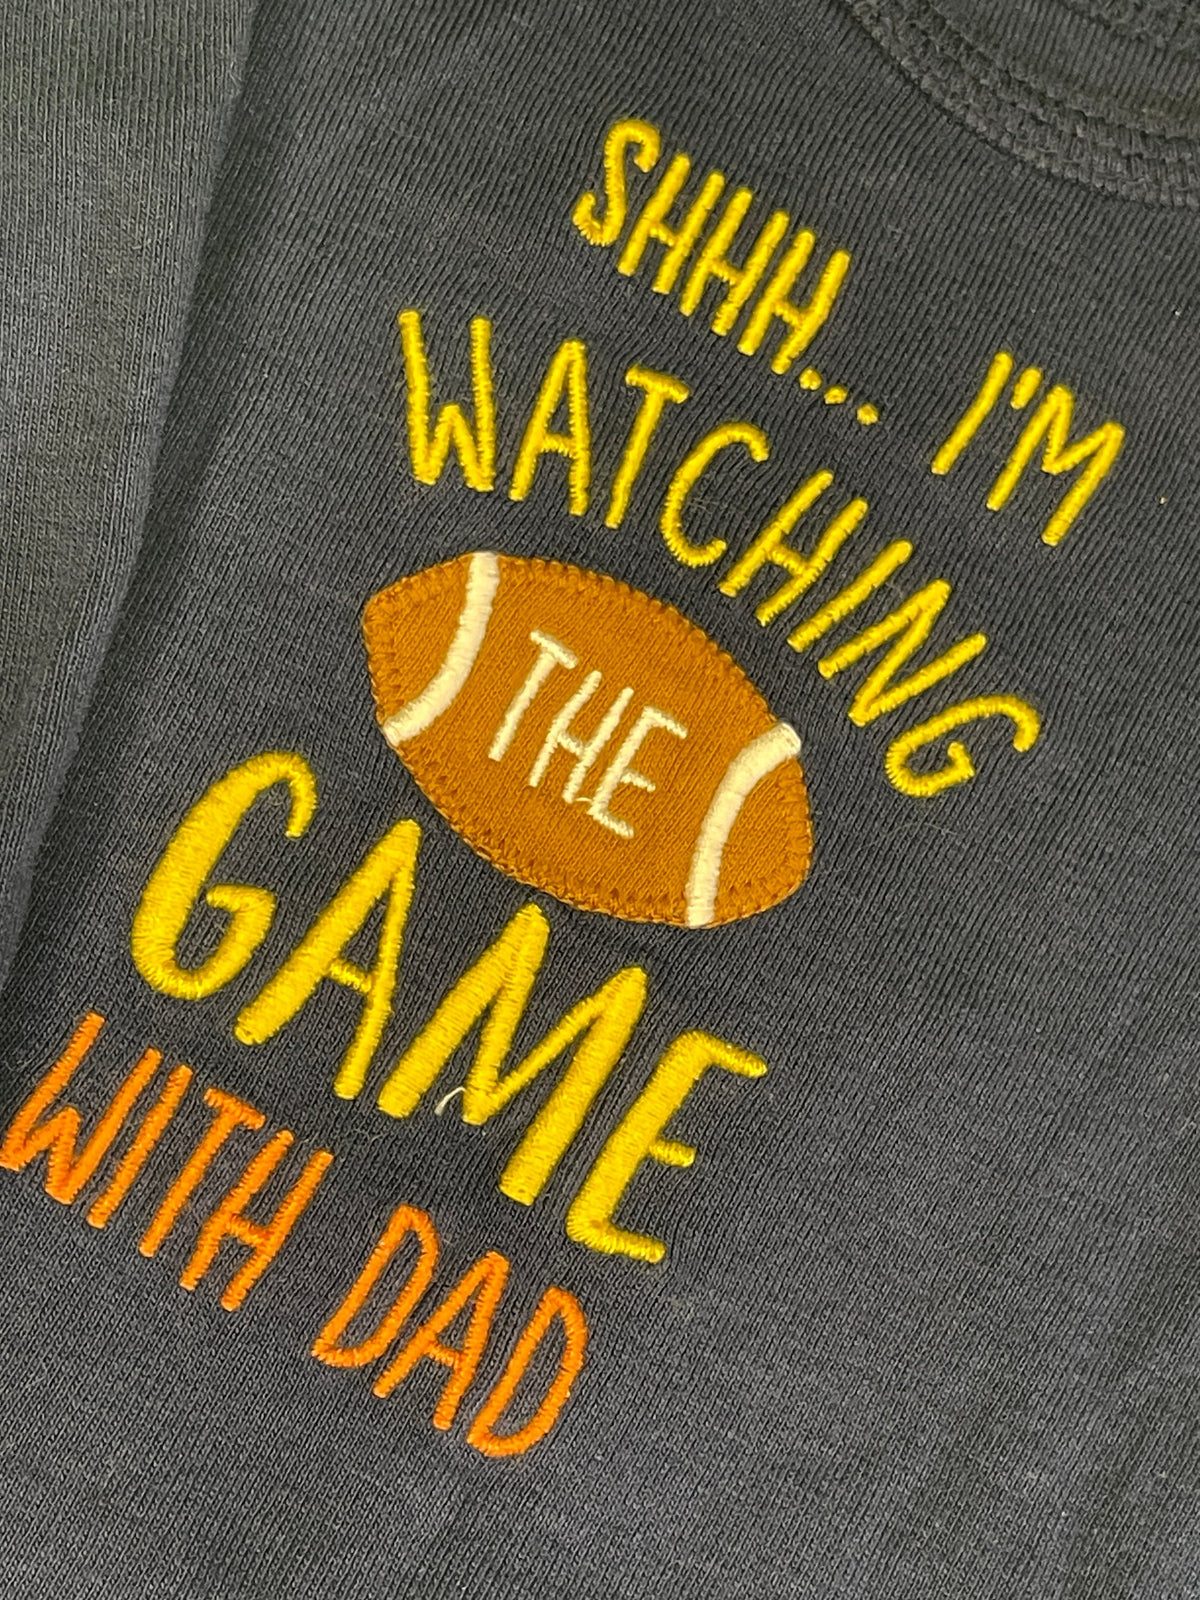 American Football "Watching the Game with Dad" L/S Bodysuit/Vest Infant Newborn